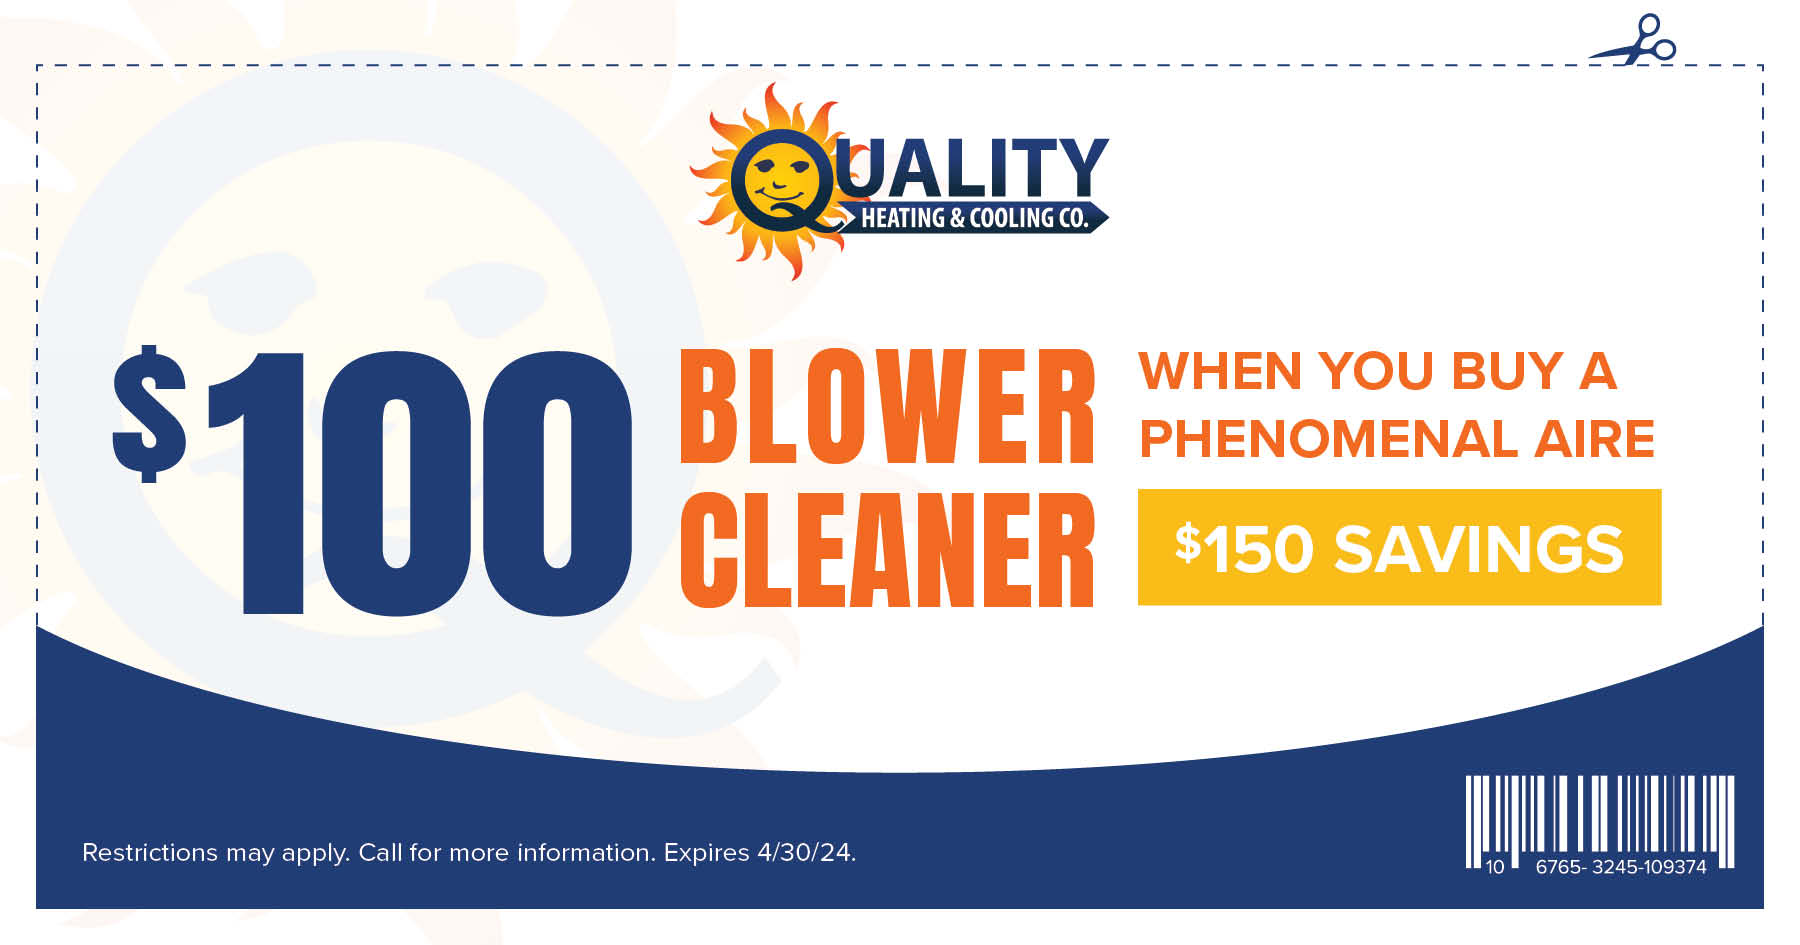 $100 blower cleaner when you buy a phenomenal aire. $150 in savings!